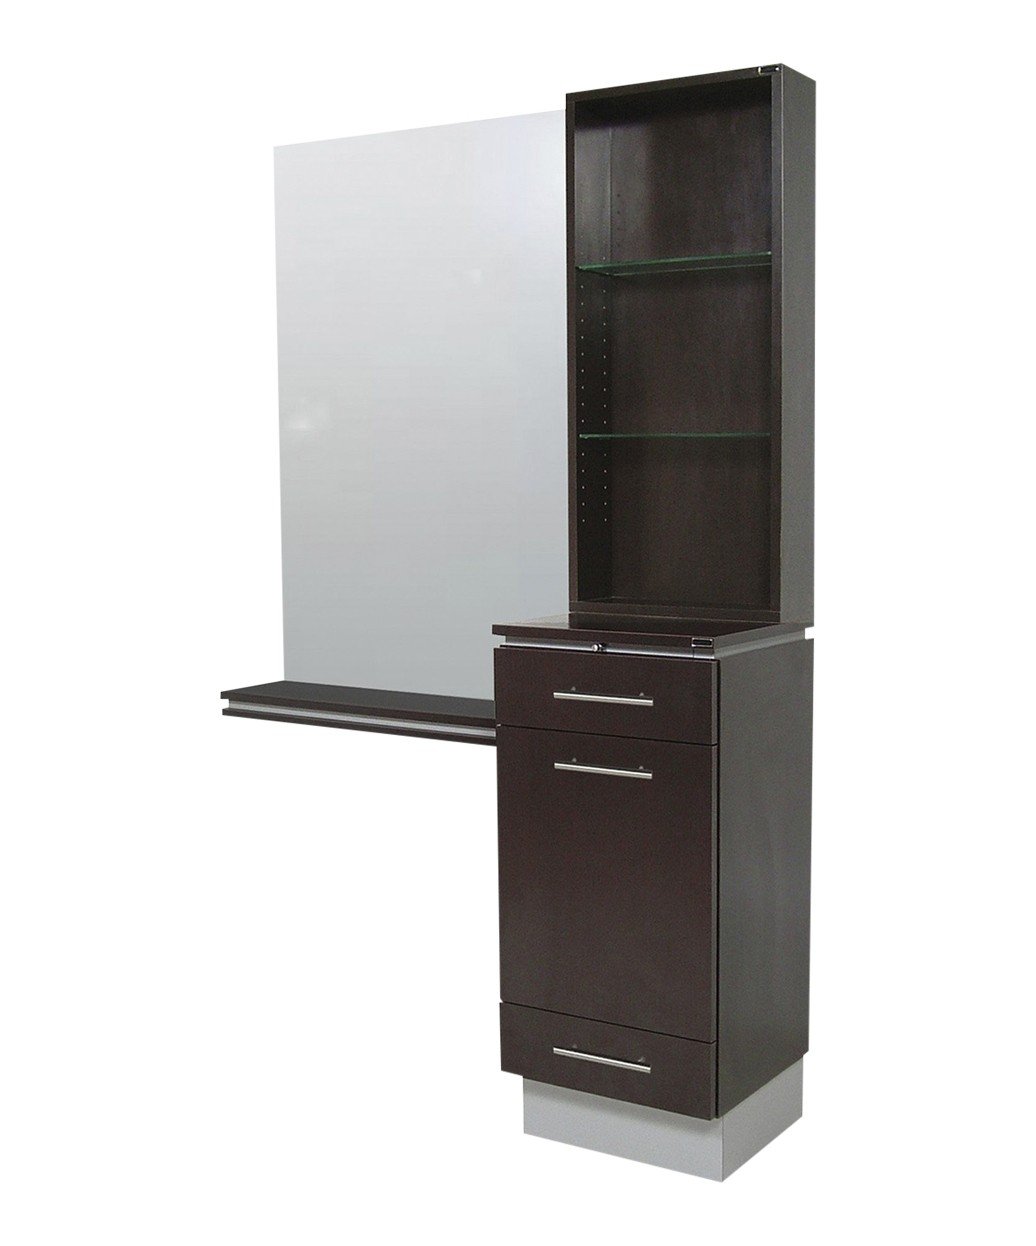 Collins QSE 4408-54 Neo London Tower Styling Station